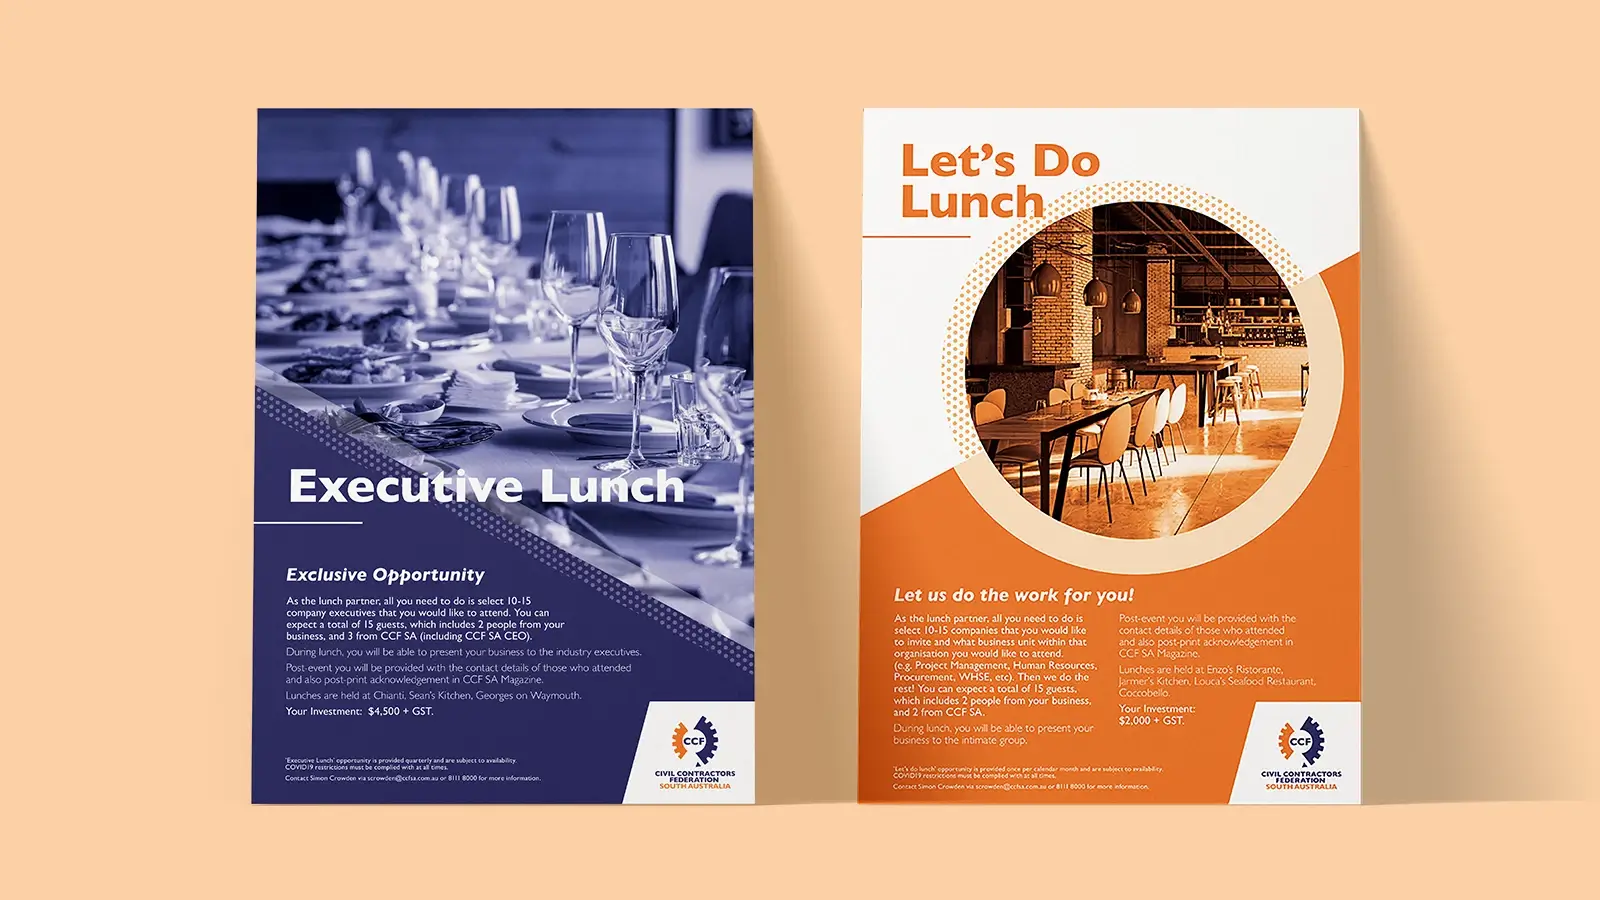 Two A5 flyers for lunch events in a graphic blue and orange style.